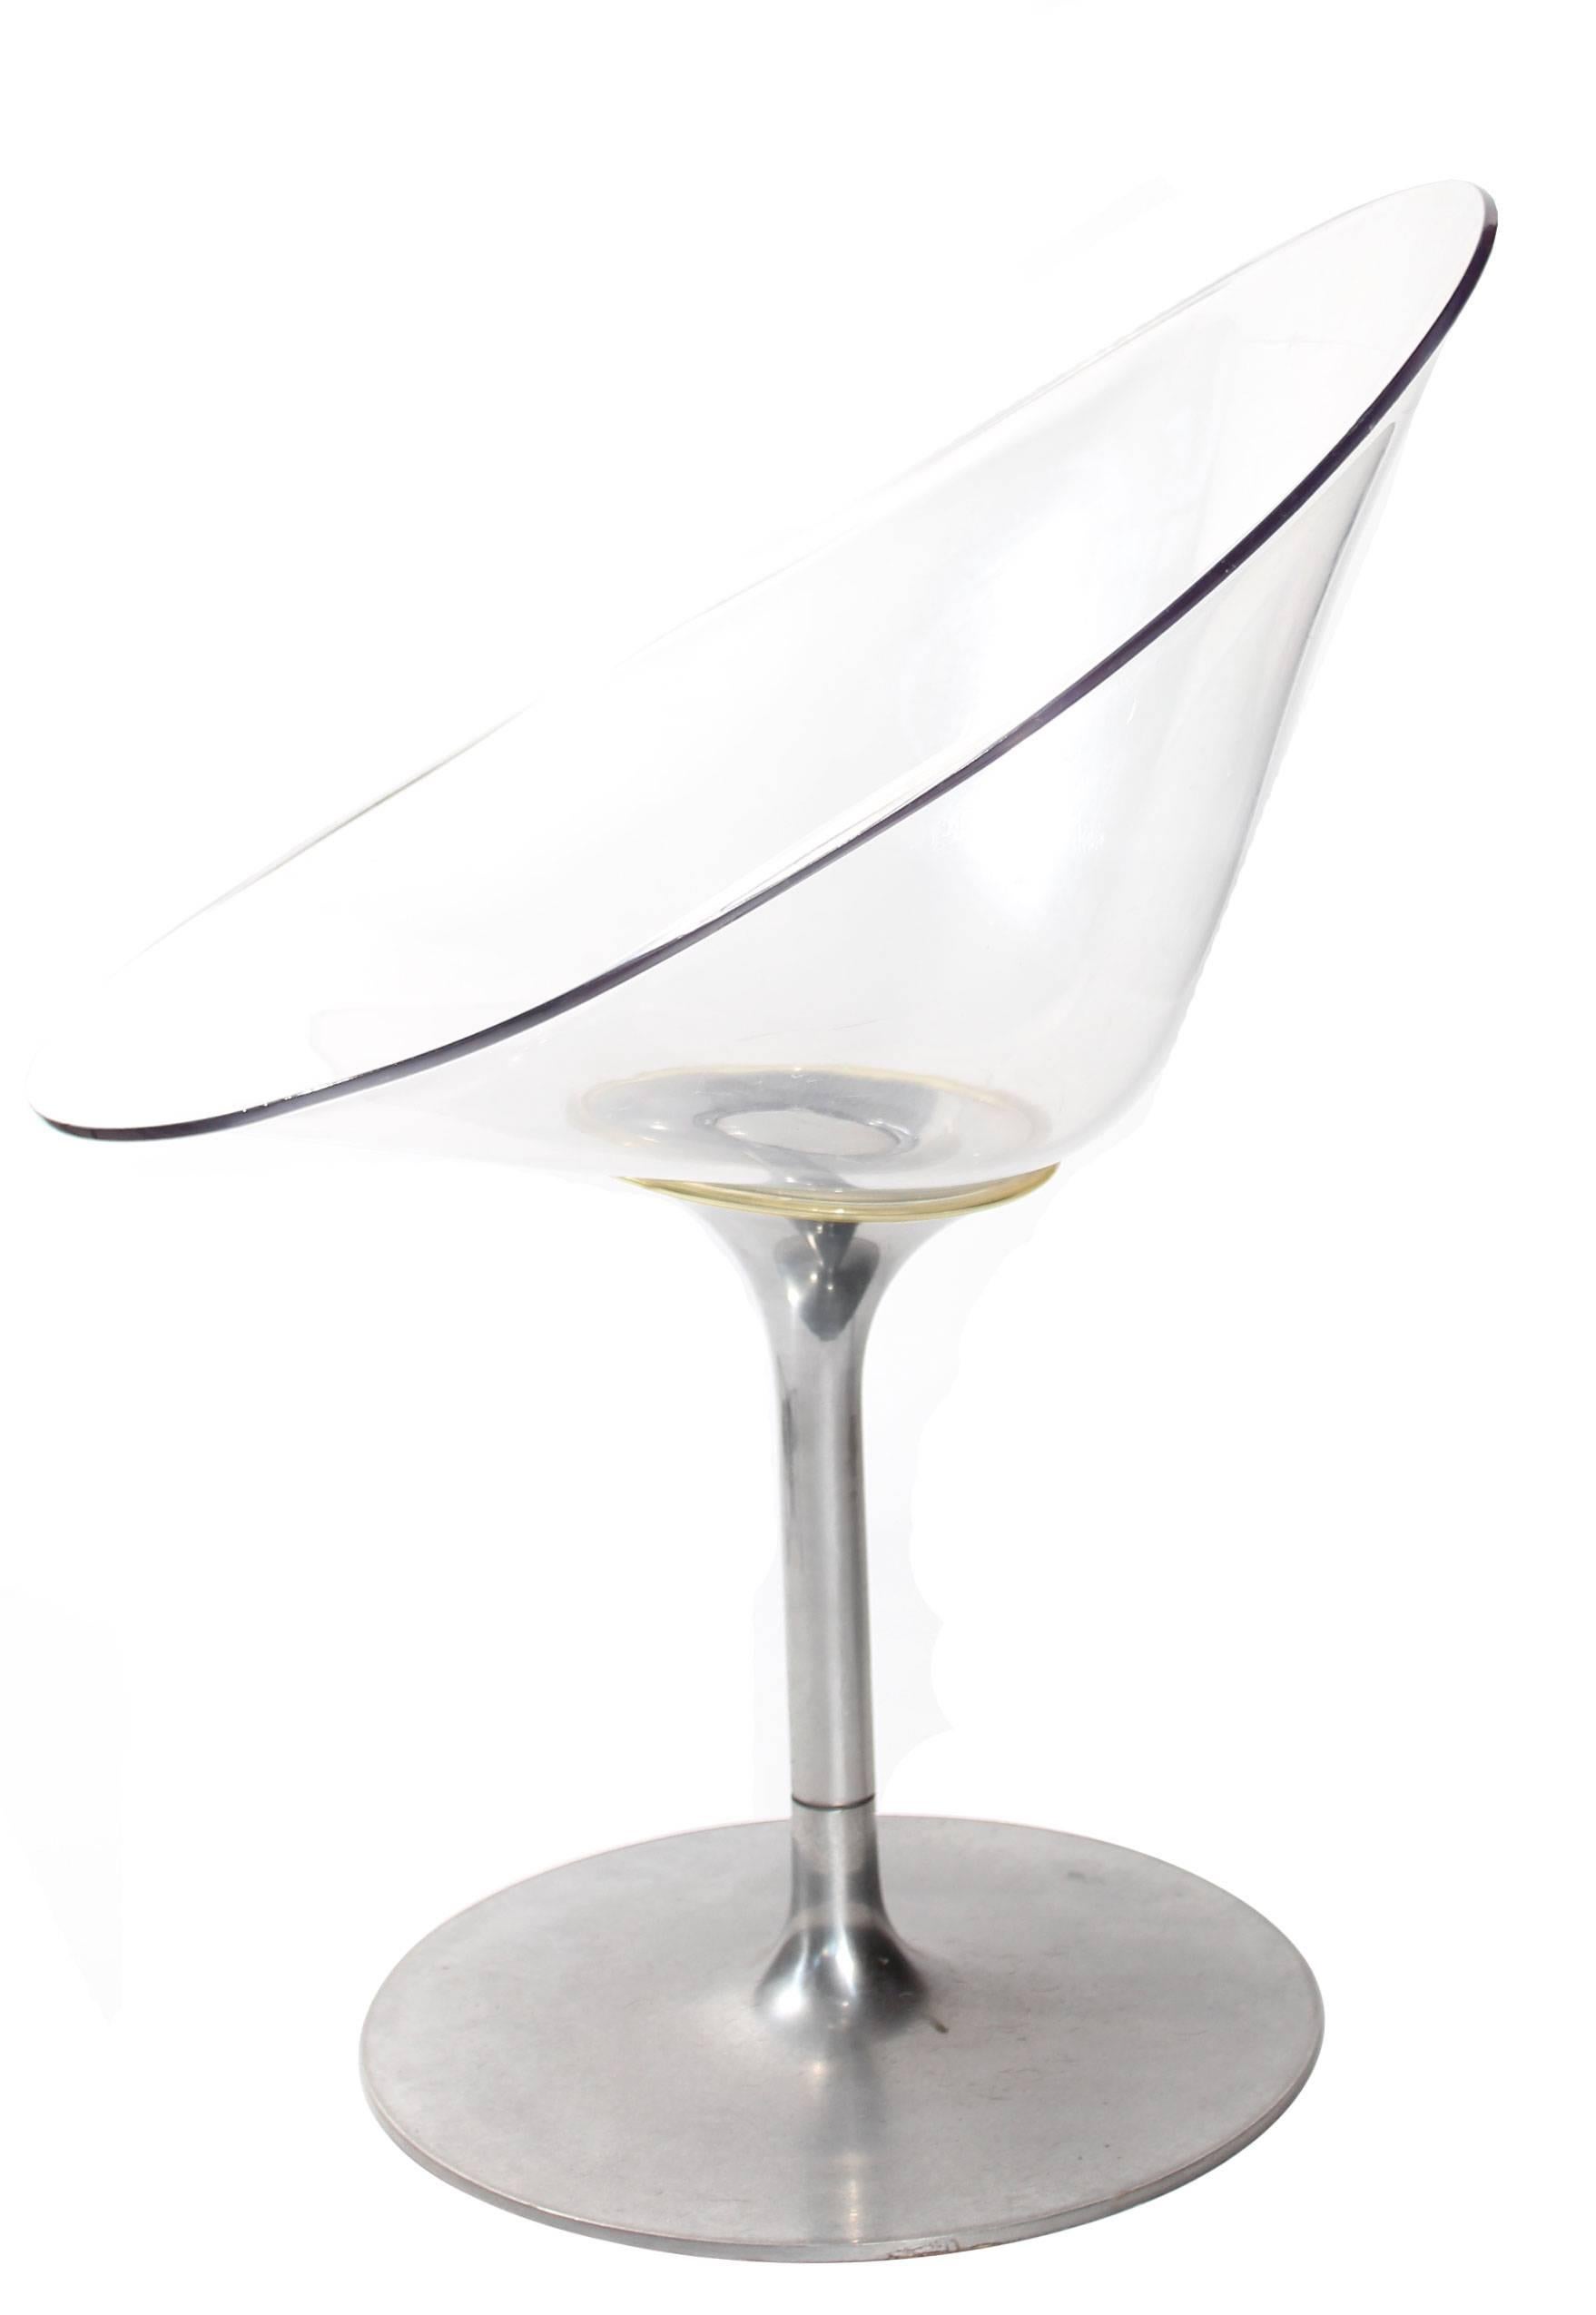 Set of two Lucite and aluminum Eros S, Italian chairs by Kartell.